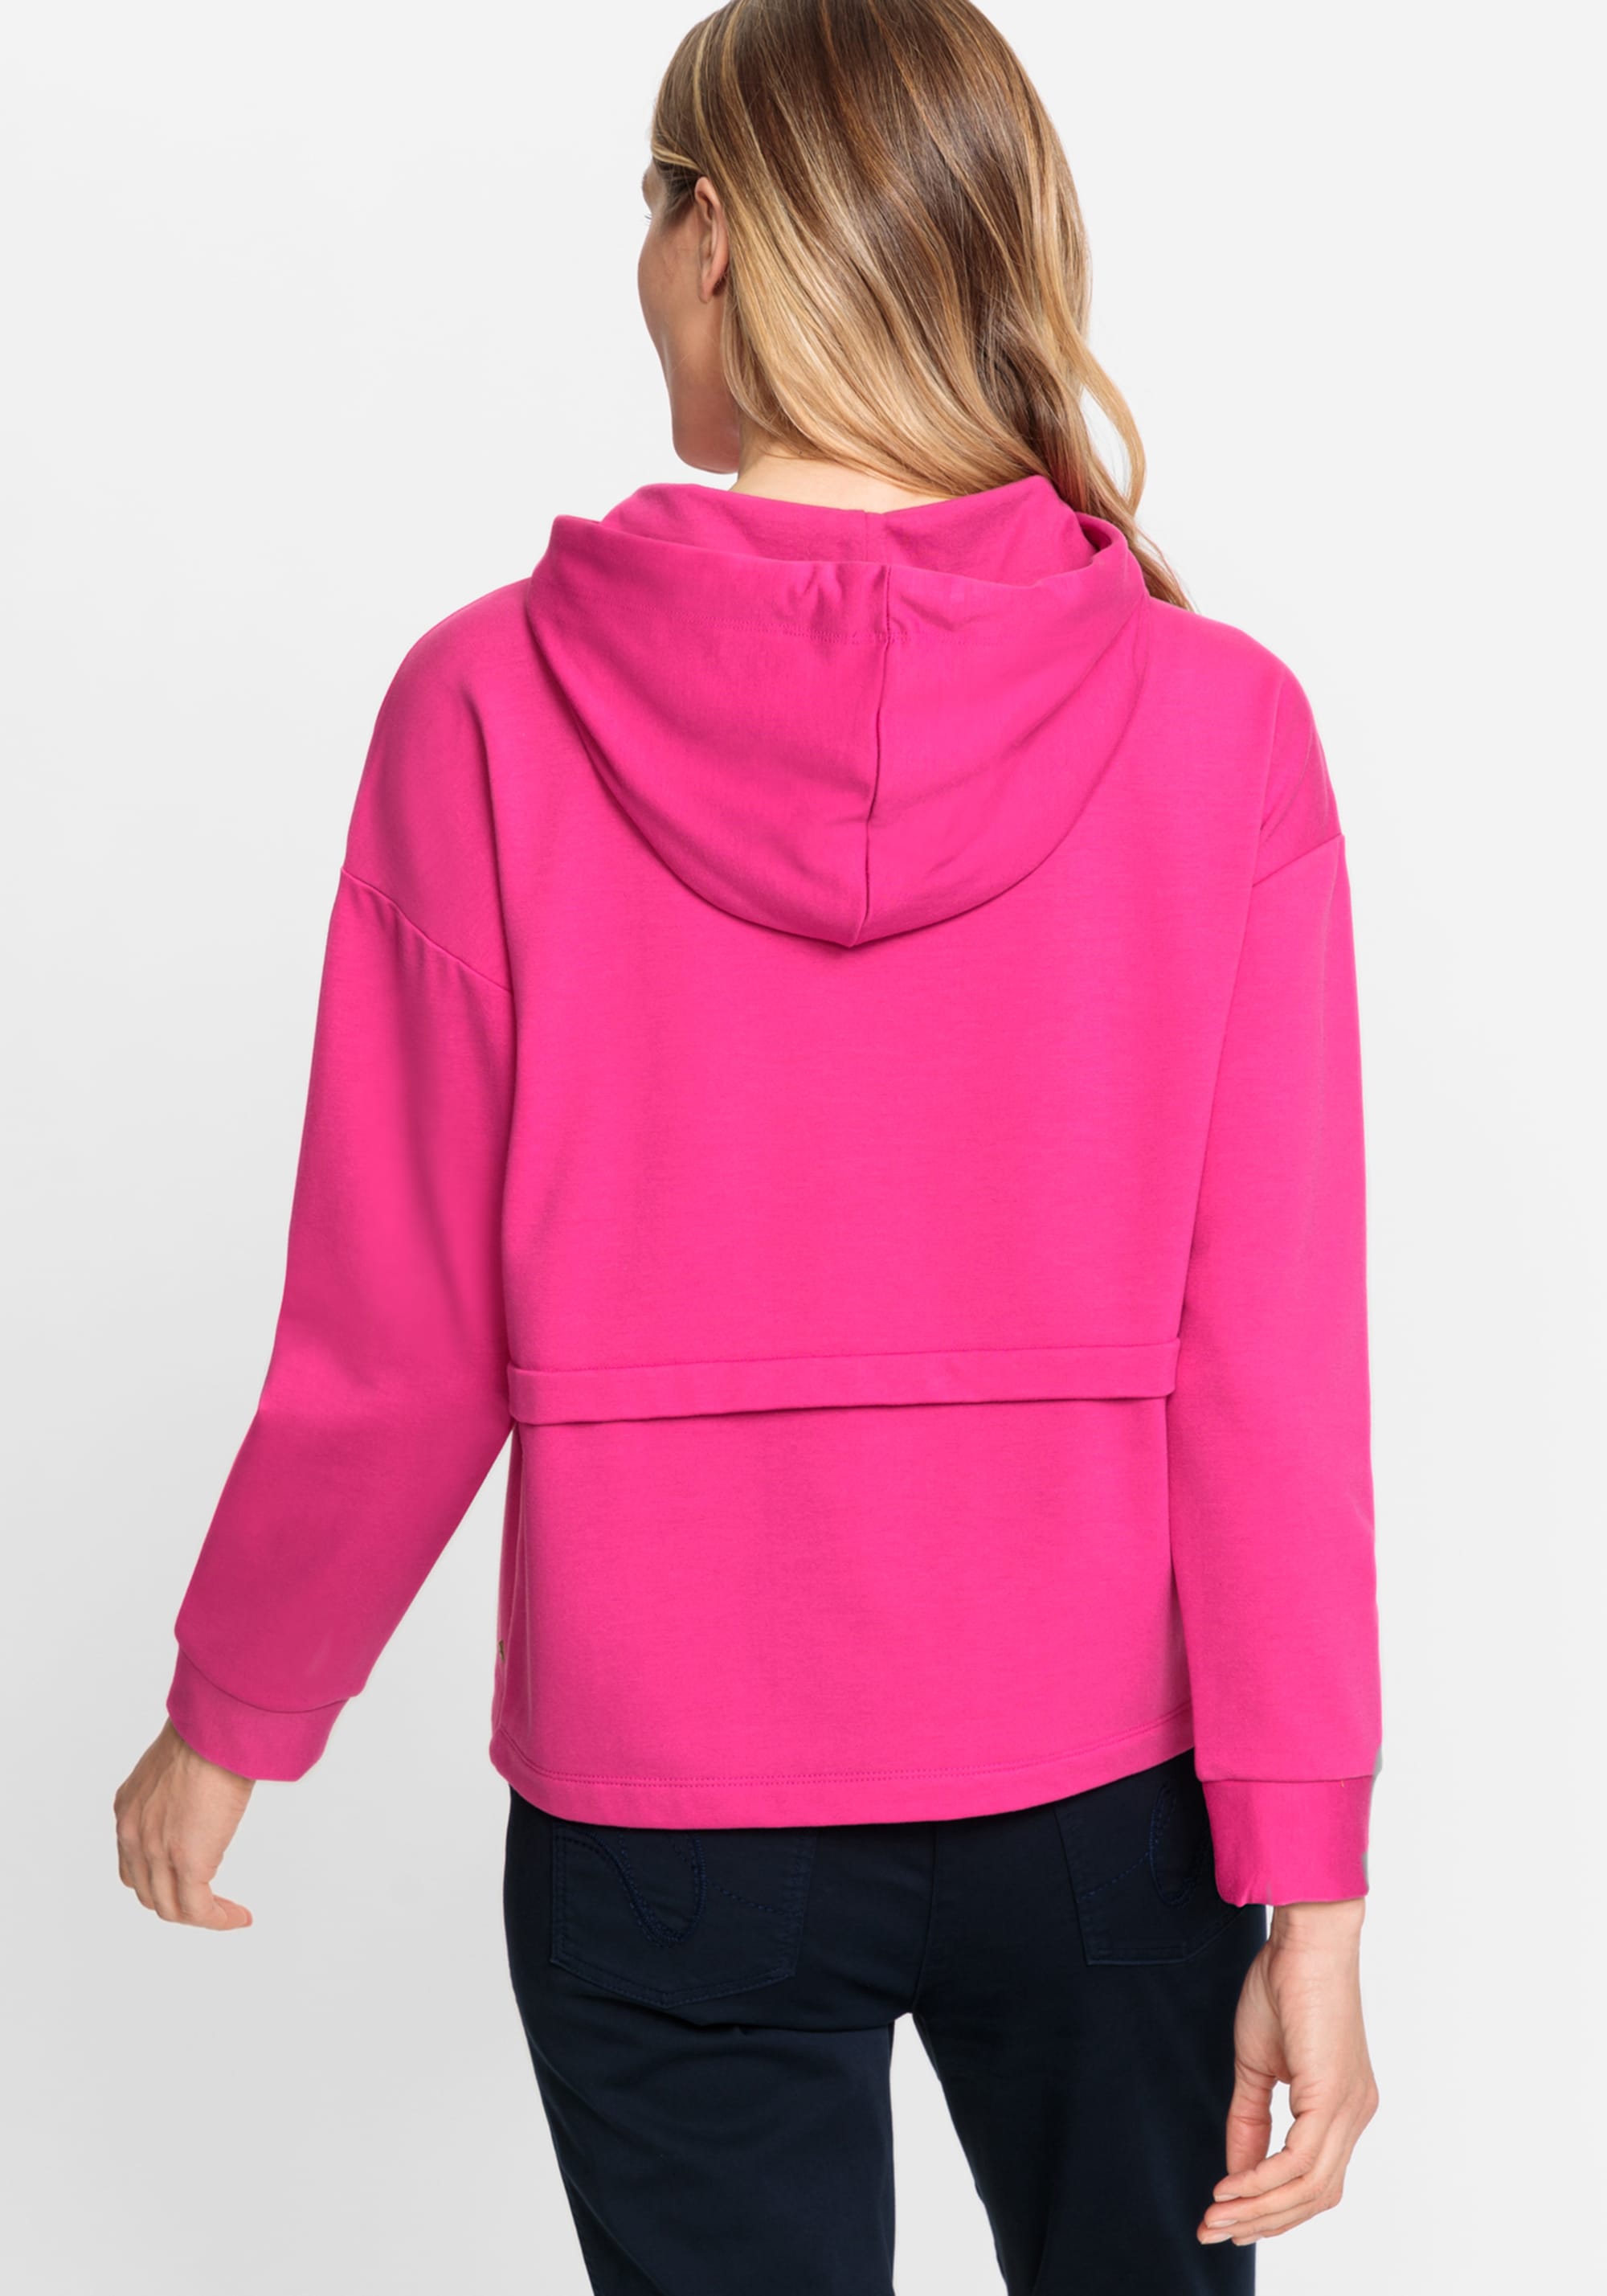 TheFound Womens Hoodies Stand Collar Pullover Long Sleeve Half Zip